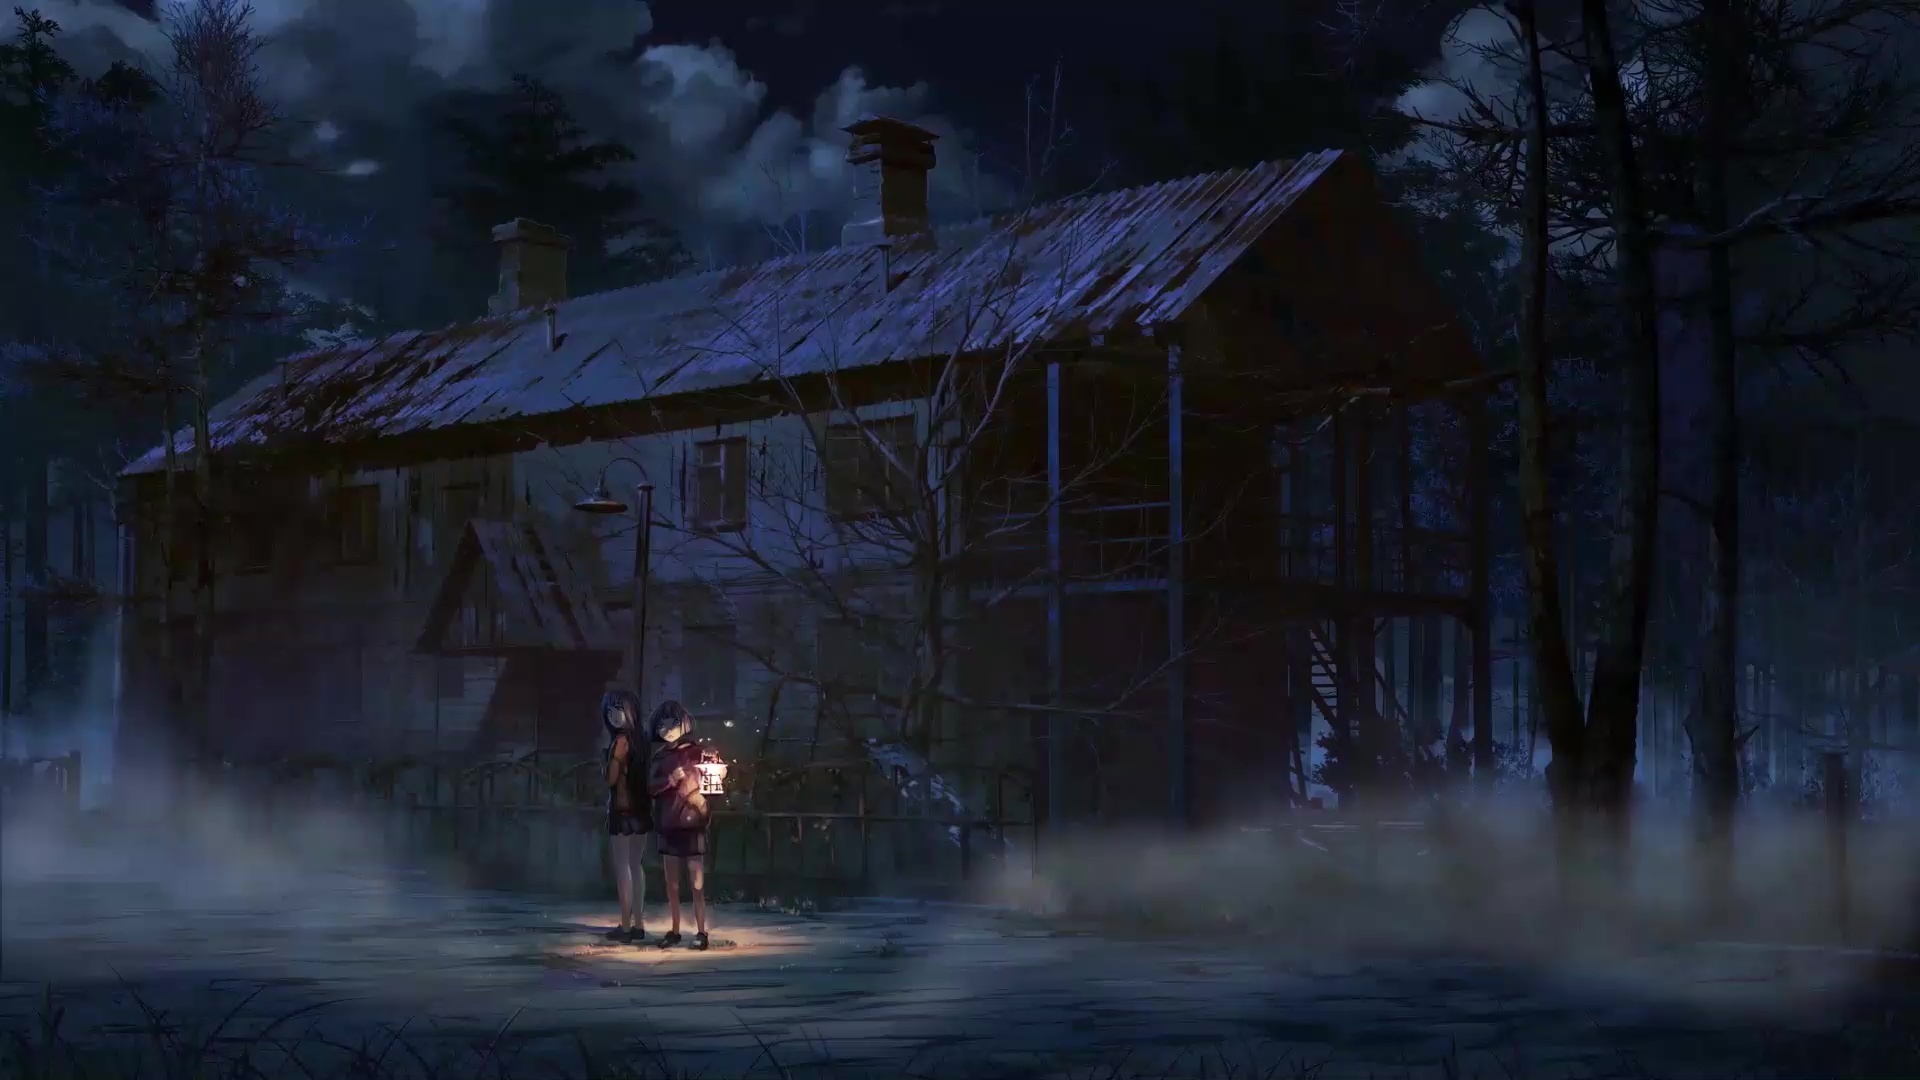 Animation, Haunted house, Ghostly elements, Eerie presence, 1920x1080 Full HD Desktop